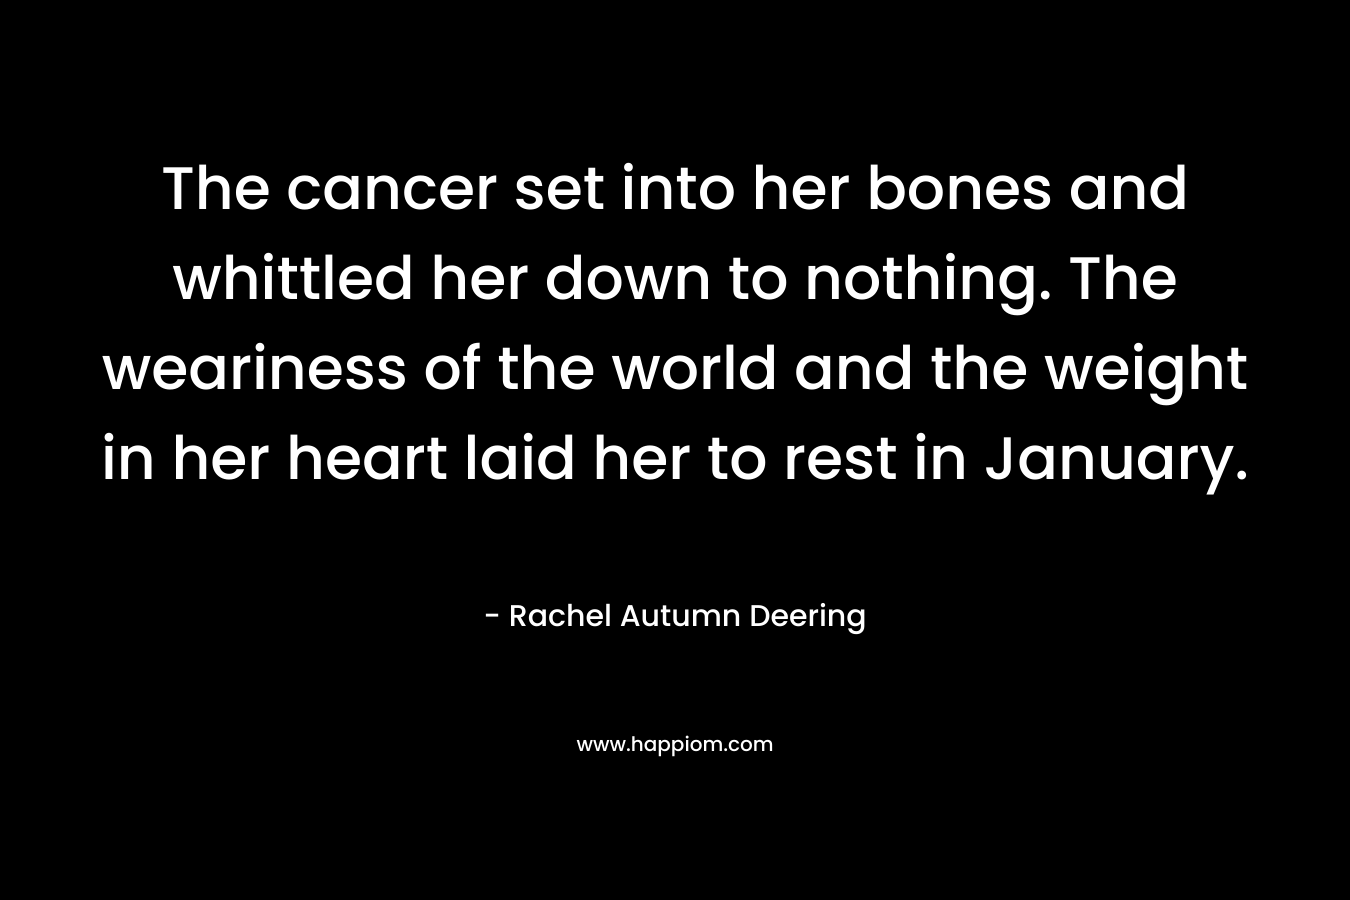 The cancer set into her bones and whittled her down to nothing. The weariness of the world and the weight in her heart laid her to rest in January. – Rachel Autumn Deering